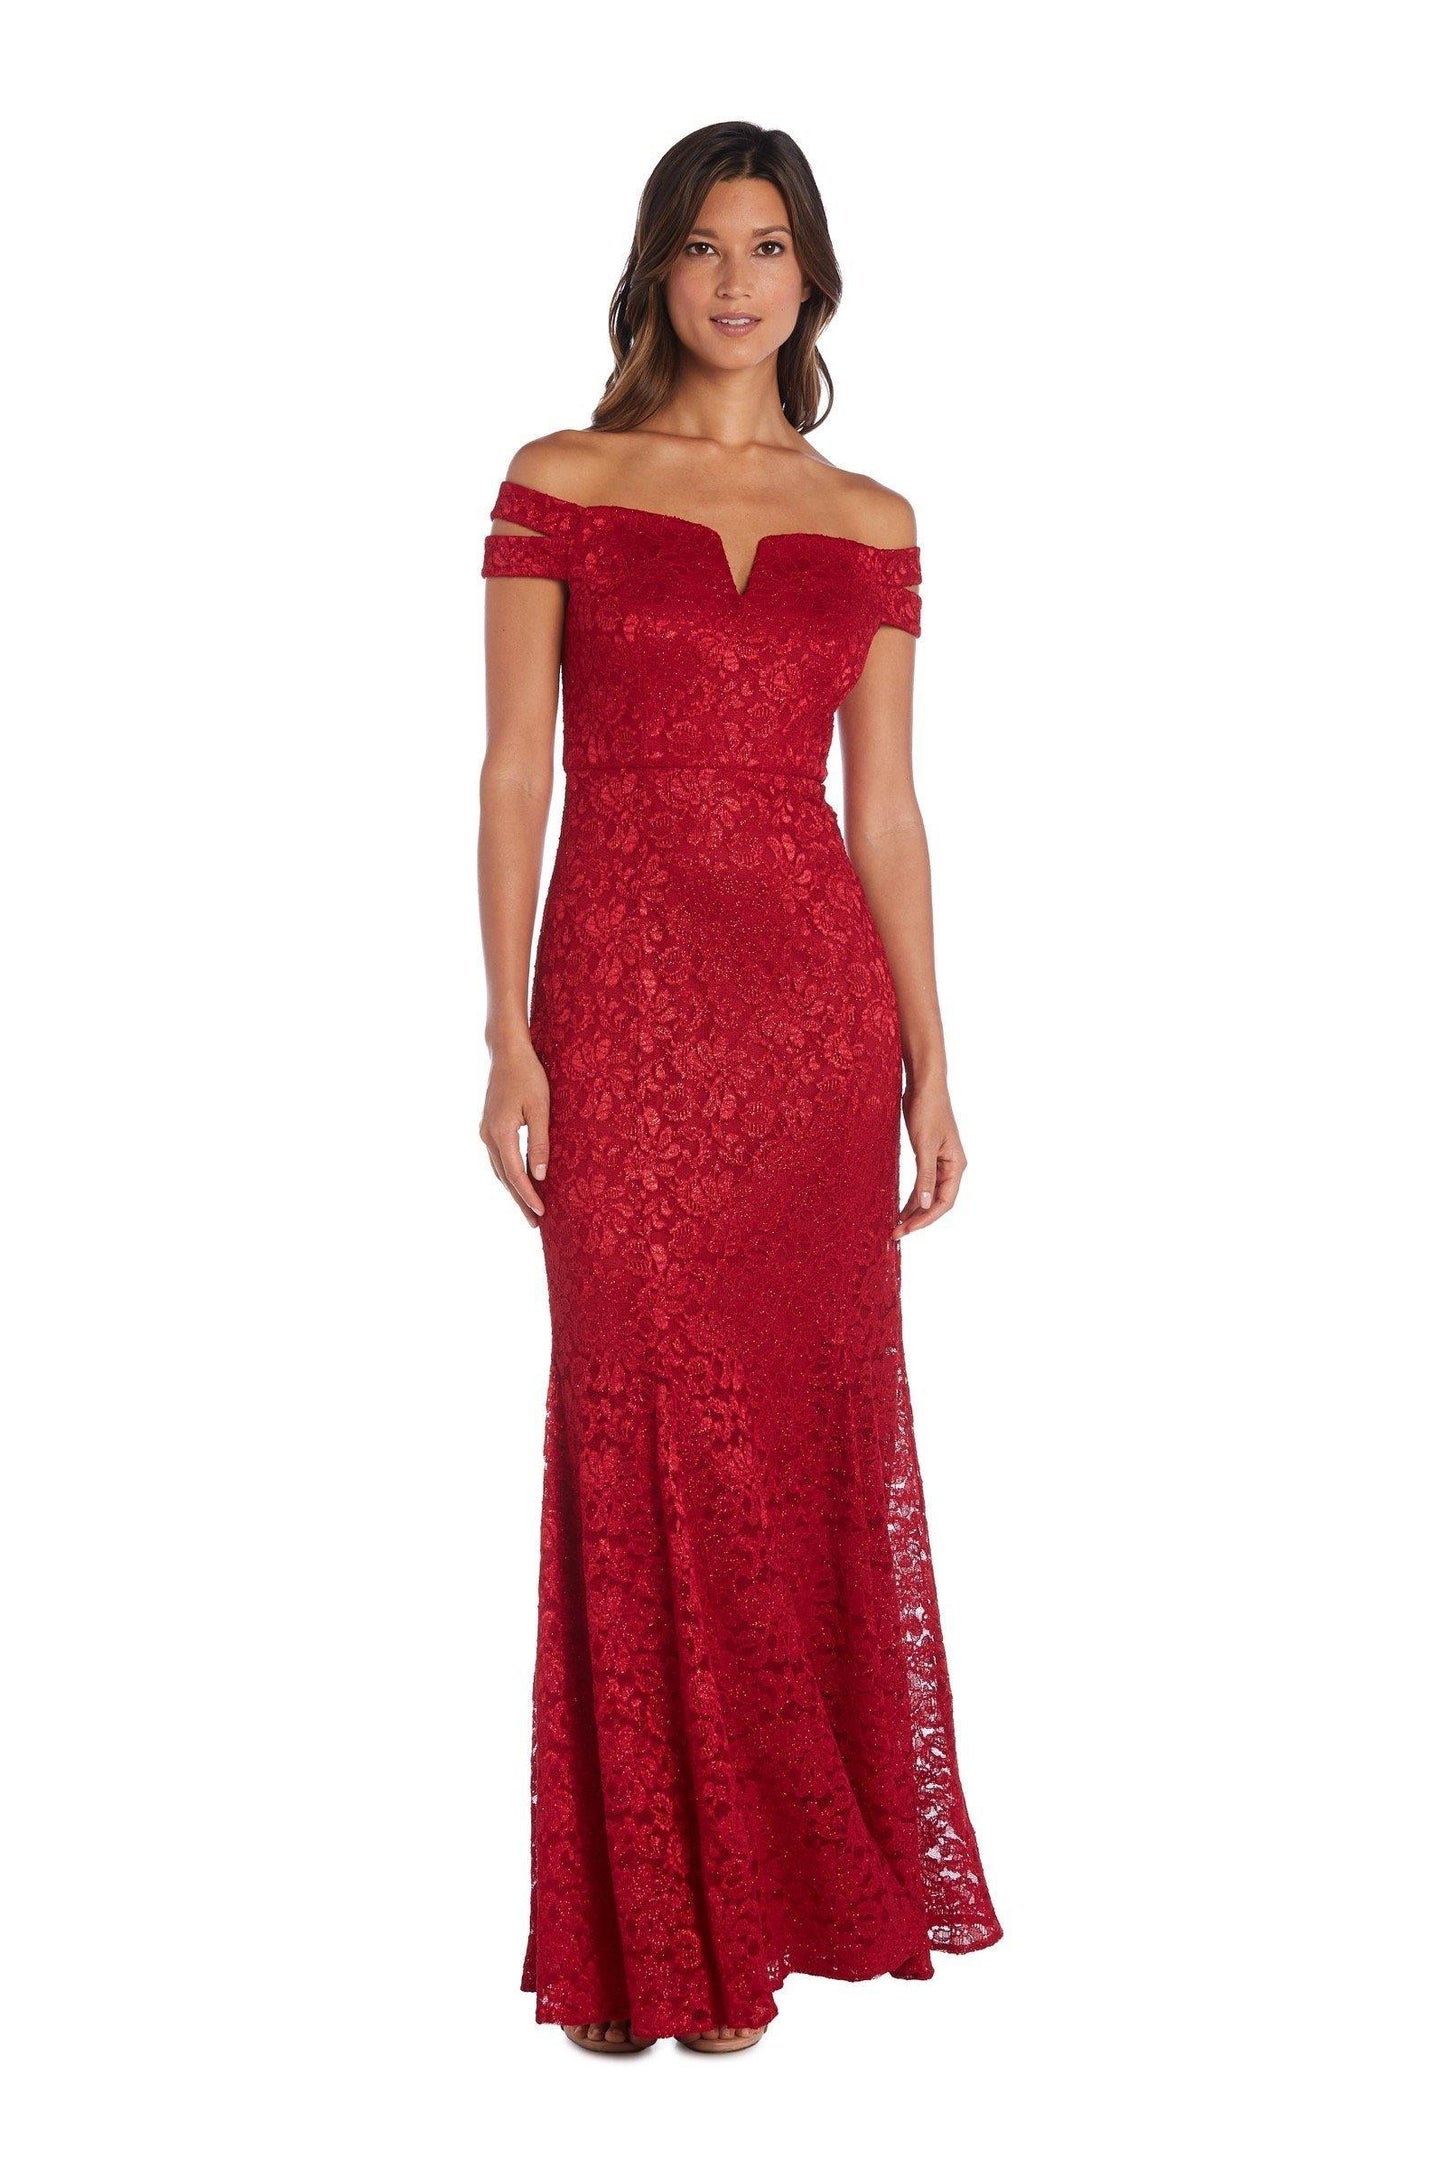 Nightway Long Formal Evening Dress Sale - The Dress Outlet